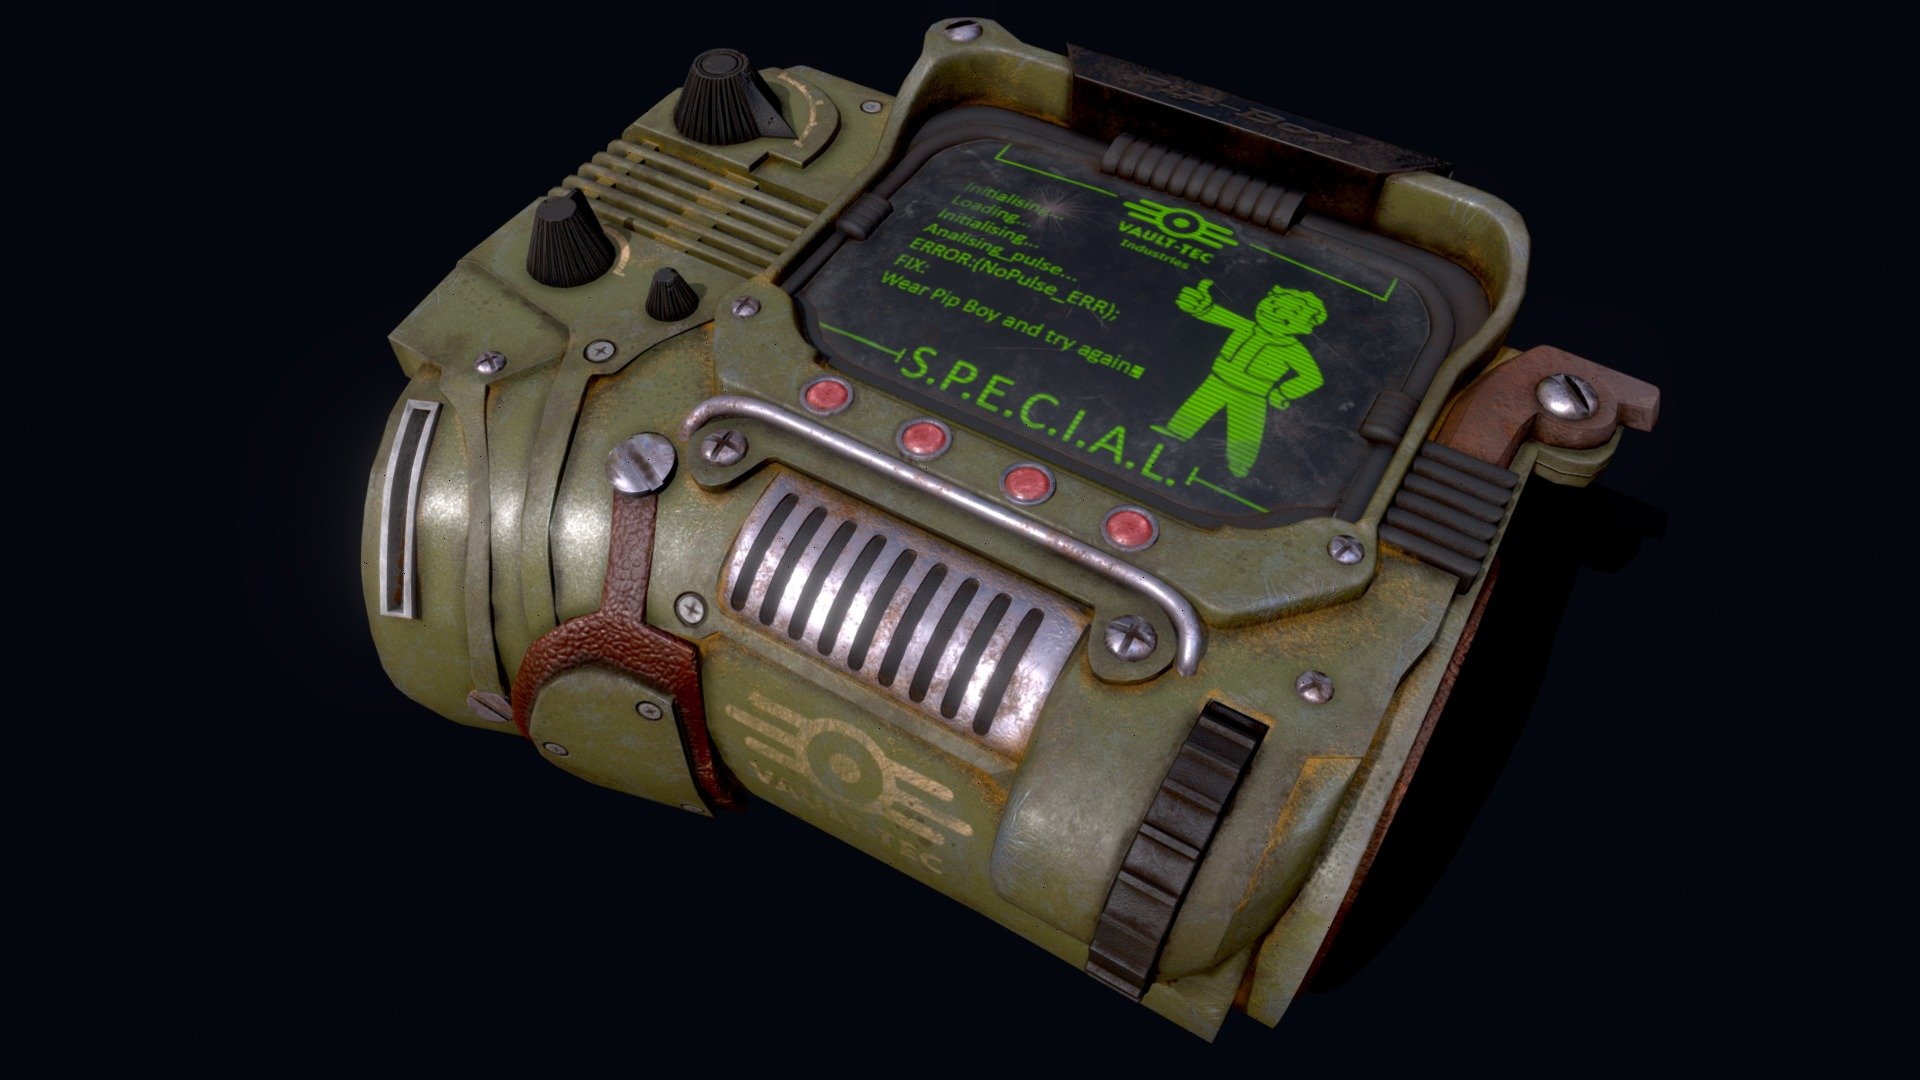 Reupload because there was an artifact that sketchfab wouldn't replace
For a game asset pipeline exercise I have decided to make a Pip-Boy from Fallout 3 concept art that hadn’t been developed.
Modeled entirely in Maya and Textured in Substance with stamps made in Photoshop 3d model